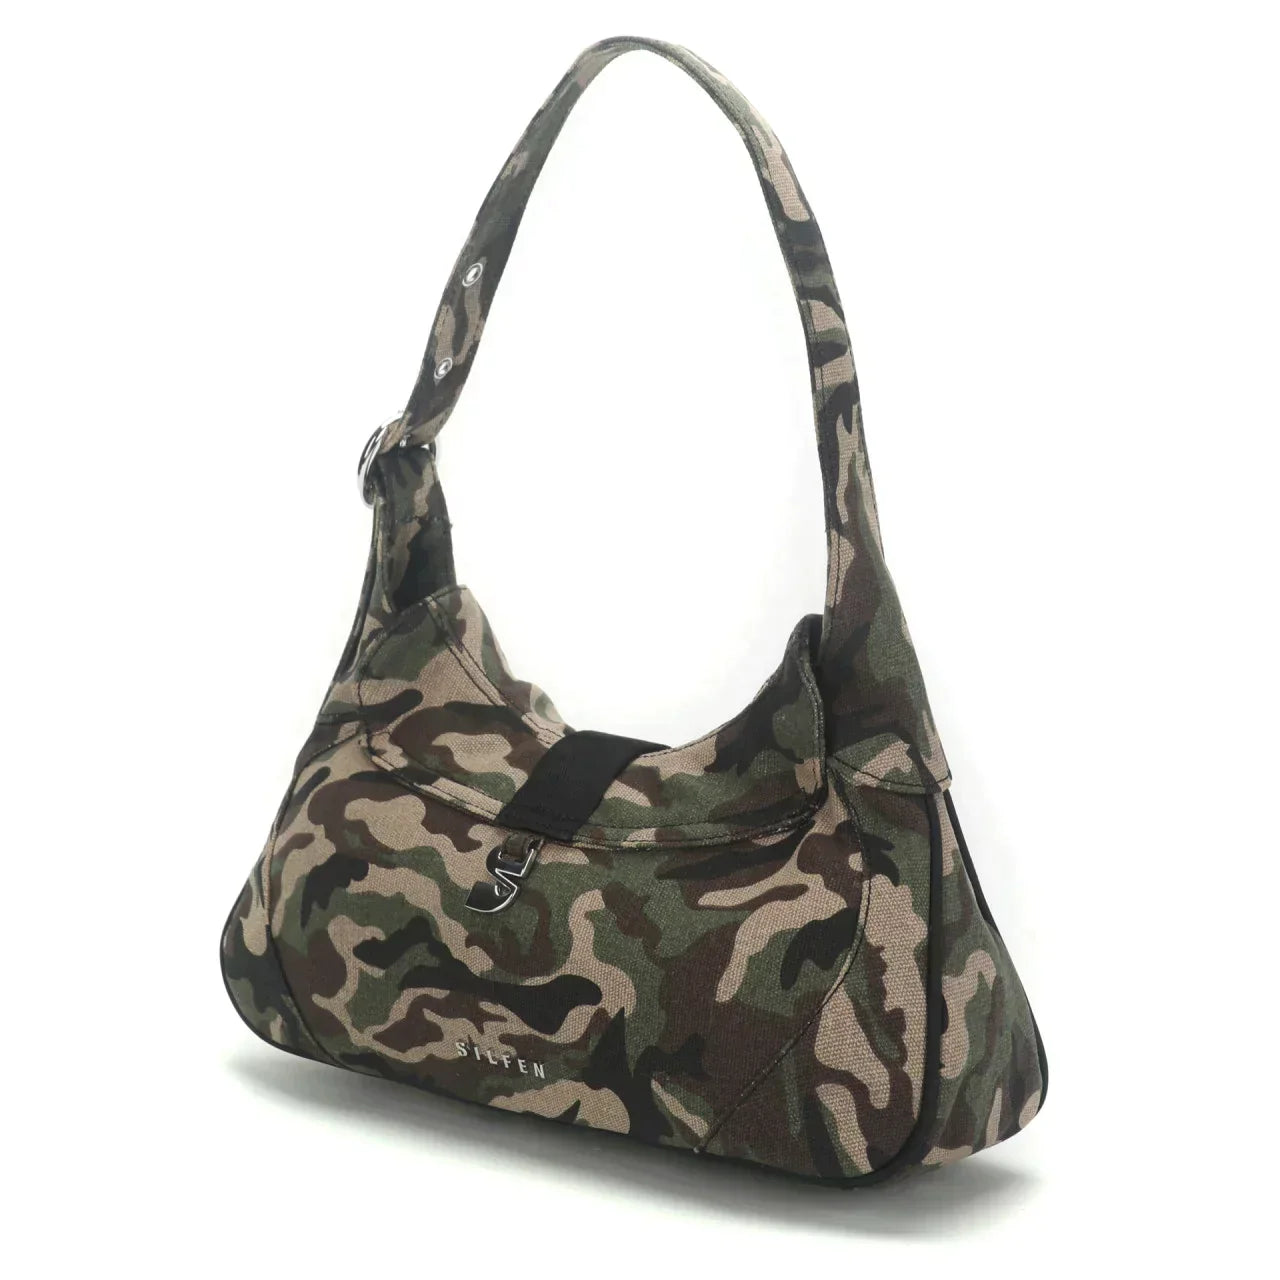 THE THEA SHOULDER BAG - CAMO GREEN - EXCLUSIVE Bags from SILFEN - Just $72! SHOP NOW AT IAMINHATELOVE BOTH IN STORE FOR CYPRUS AND ONLINE WORLDWIDE